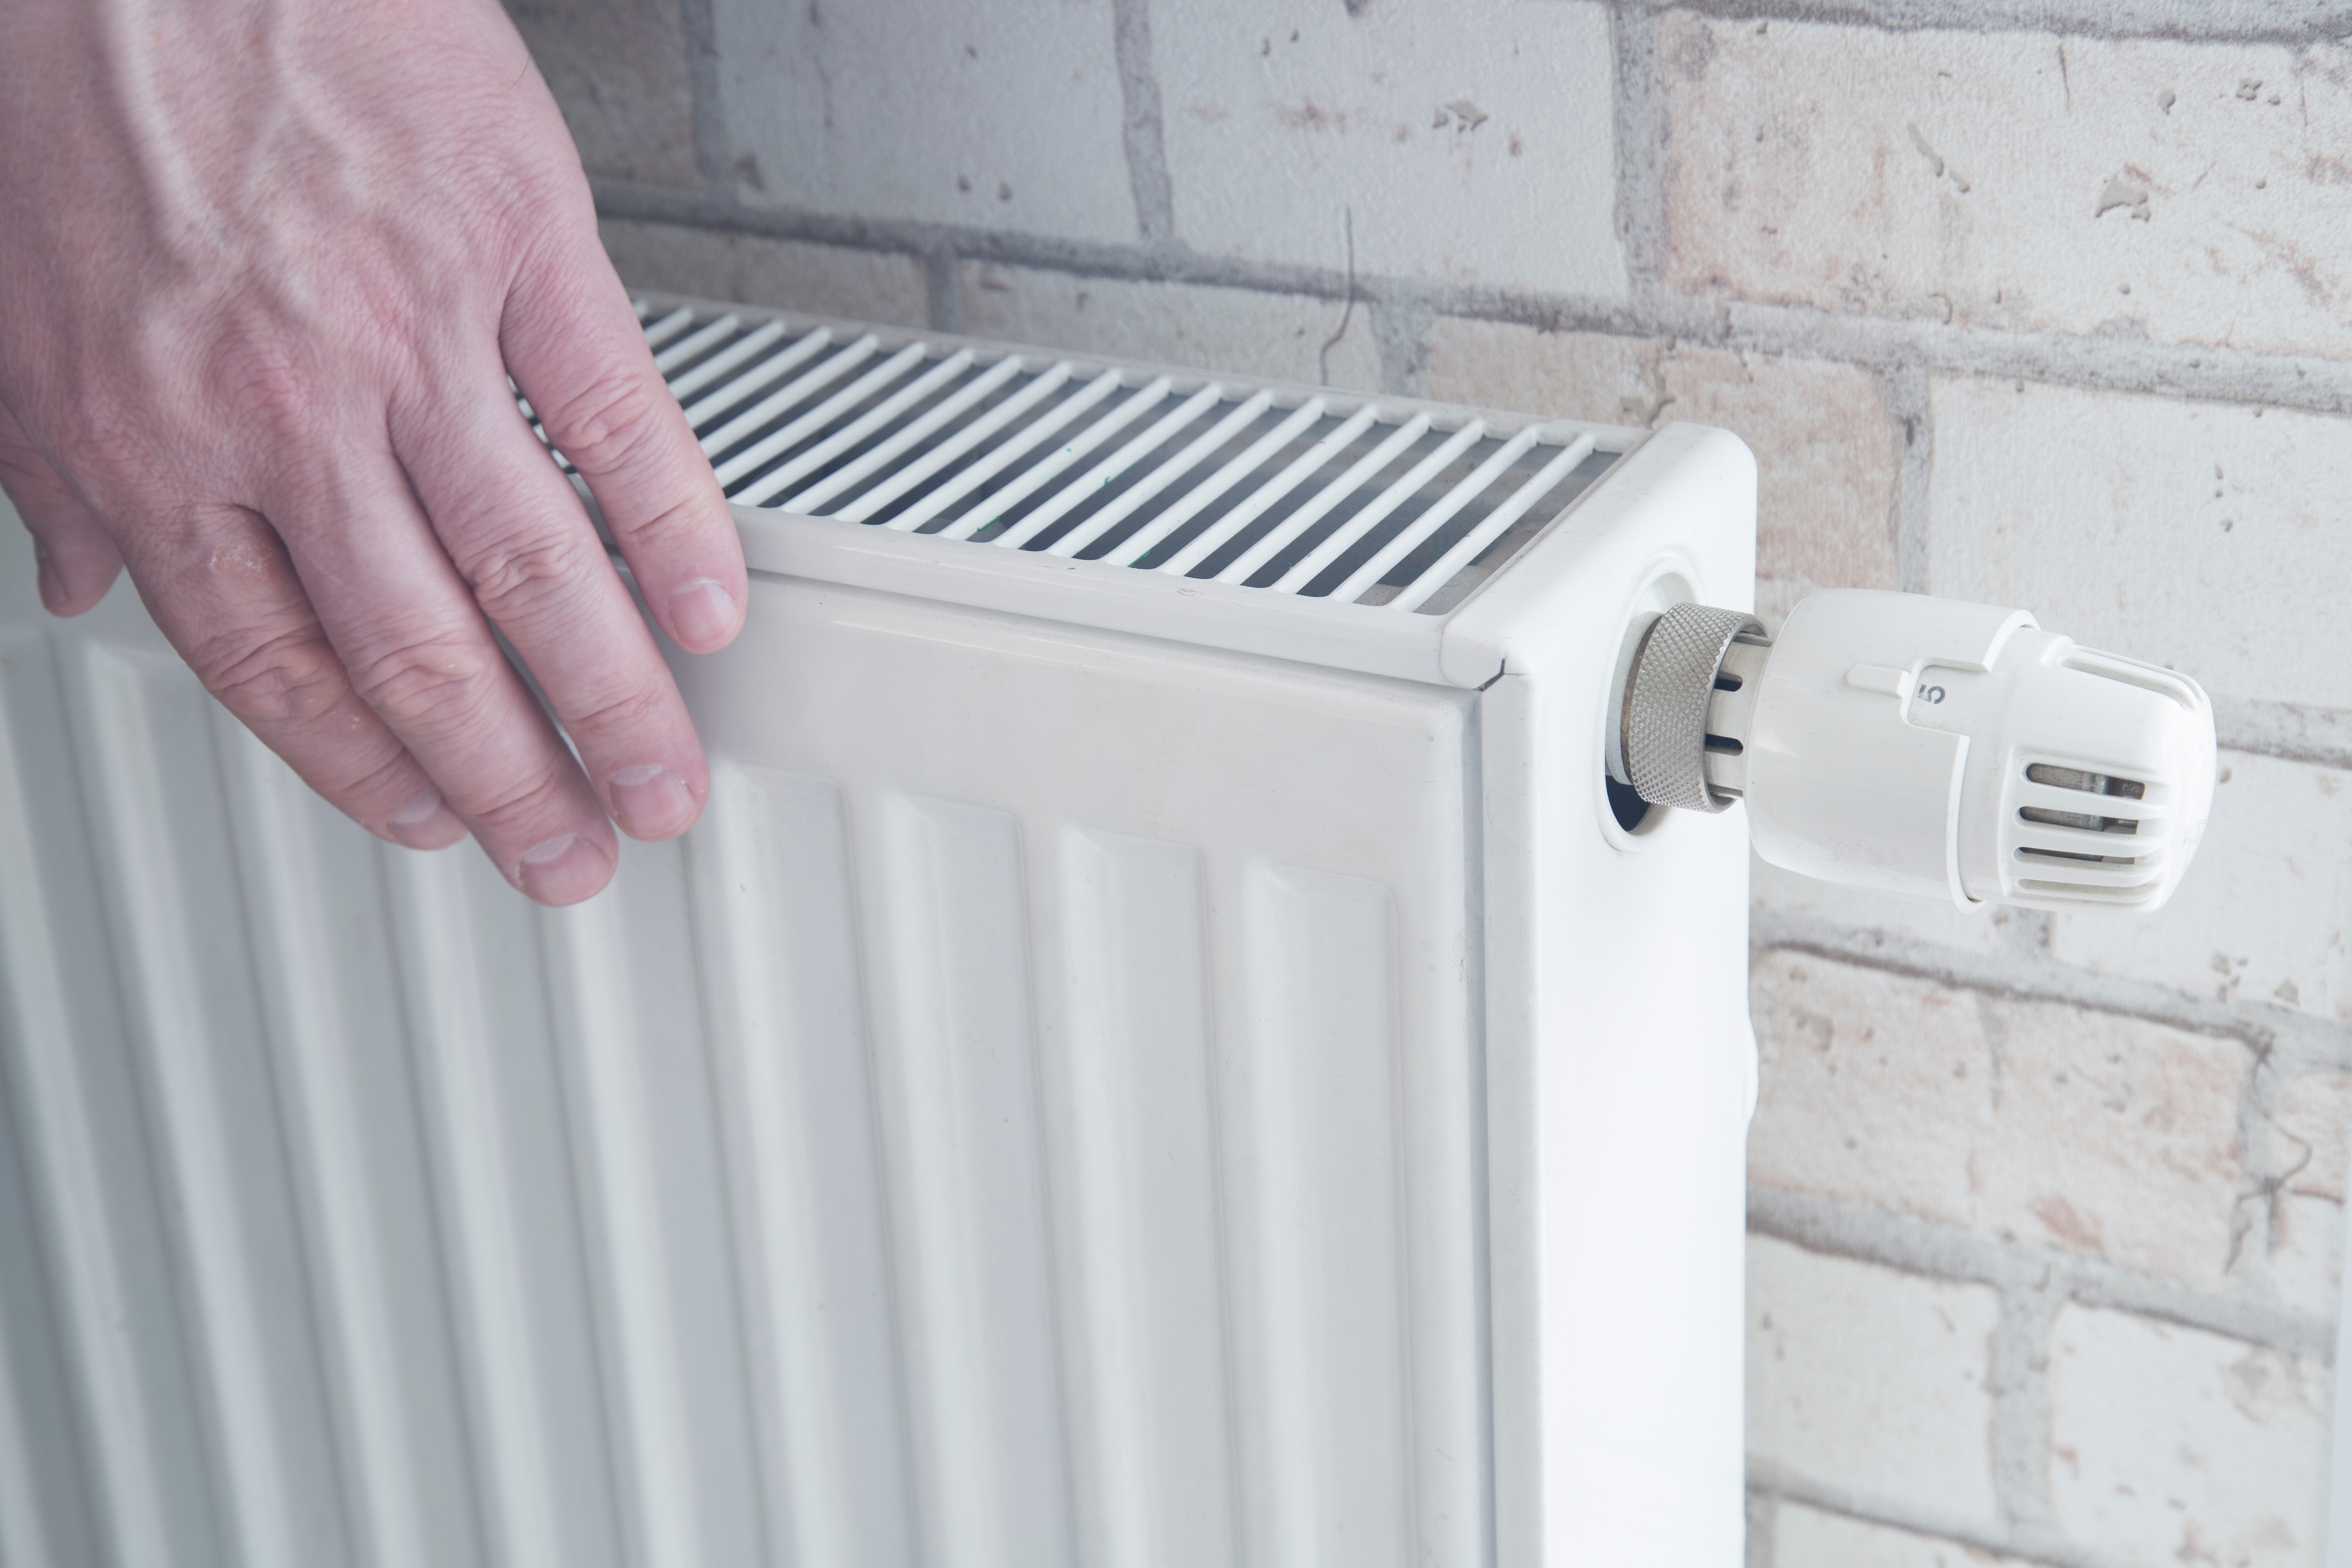 Fuel poverty increases on horizon due to energy crisis